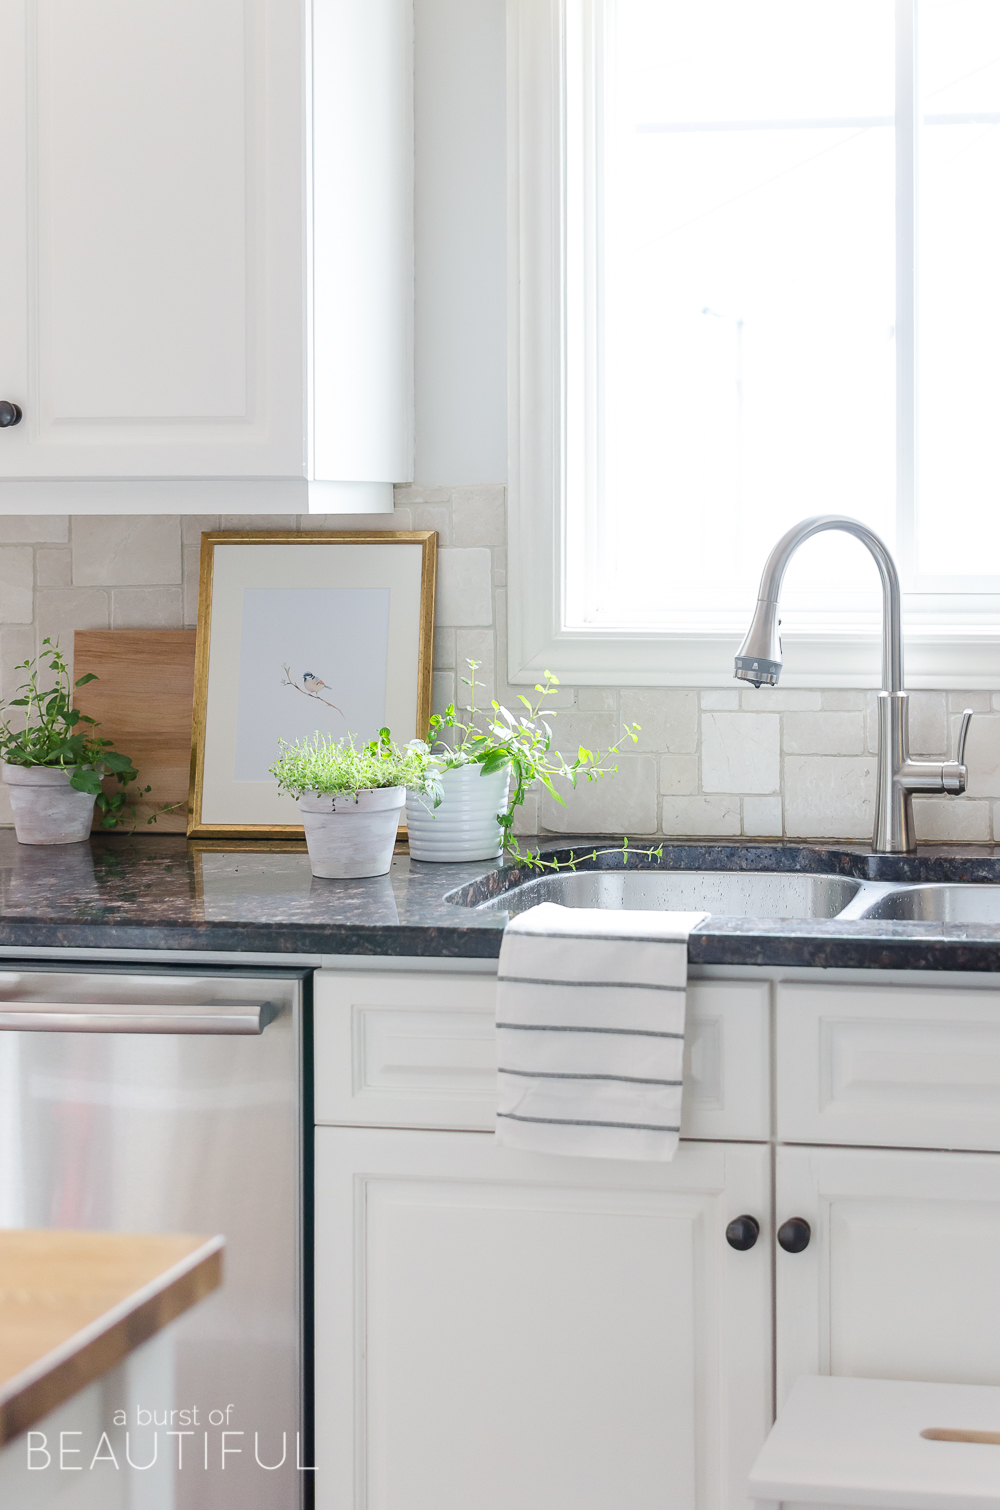 A sleek new pull-down faucet adds a touch of modern simplicity to this white modern farmhouse kitchen. 